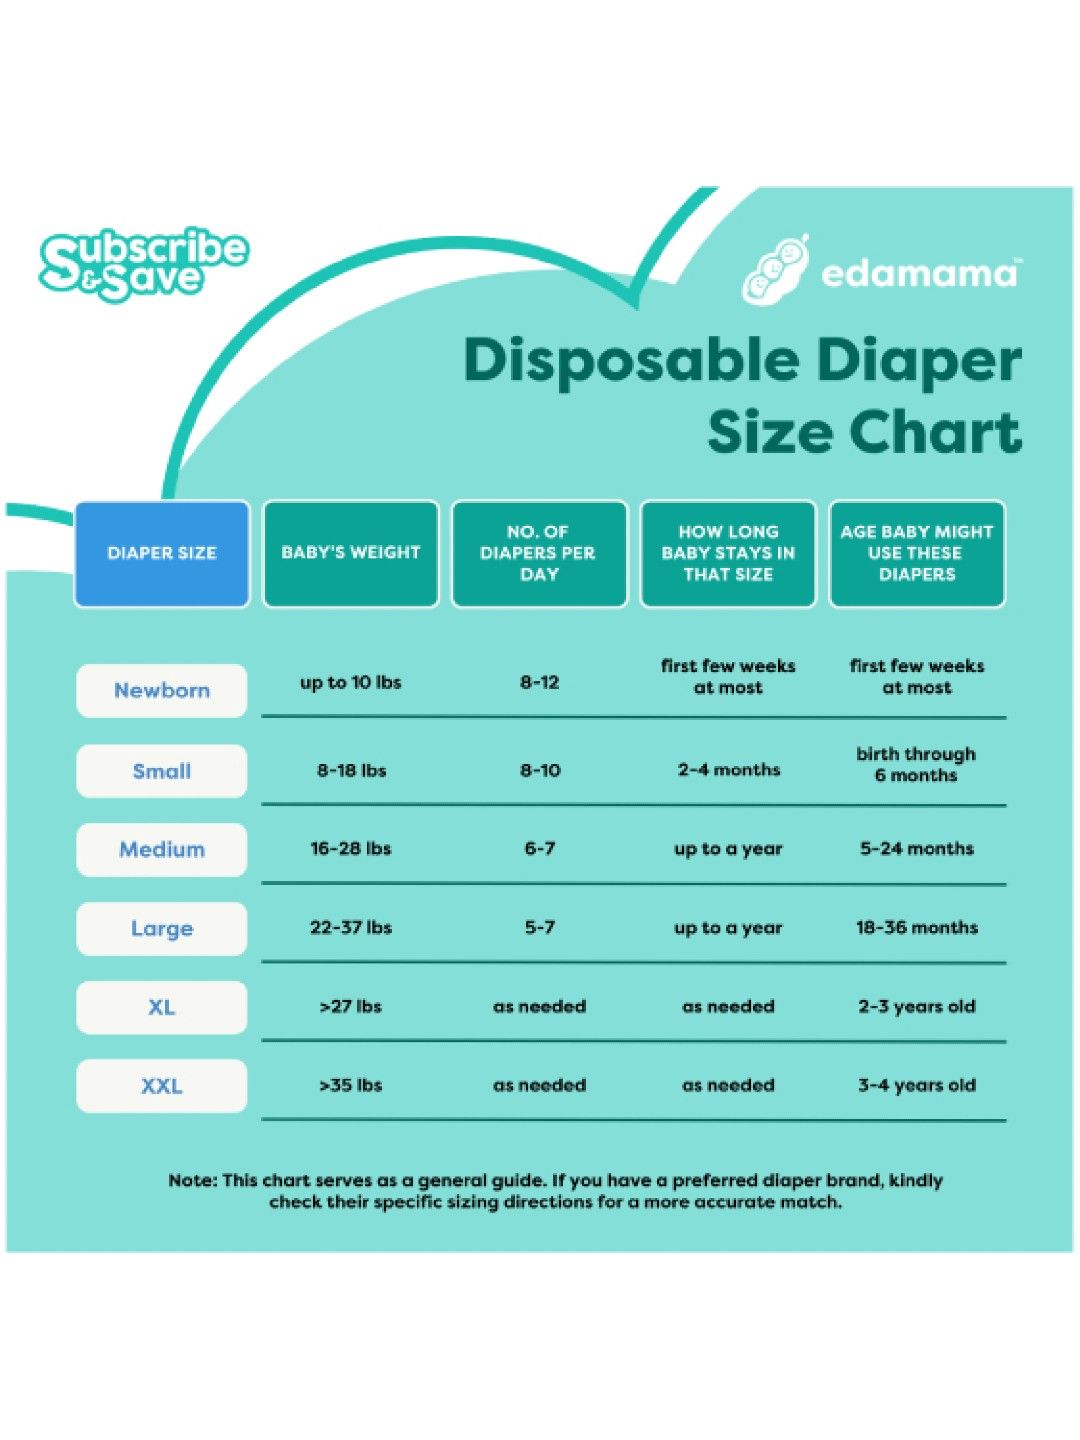 EQ Diapers and Wipes Dry Econo Pack Tape Diaper Small (40 pcs x 3 pack) - Subscription (No Color- Image 4)